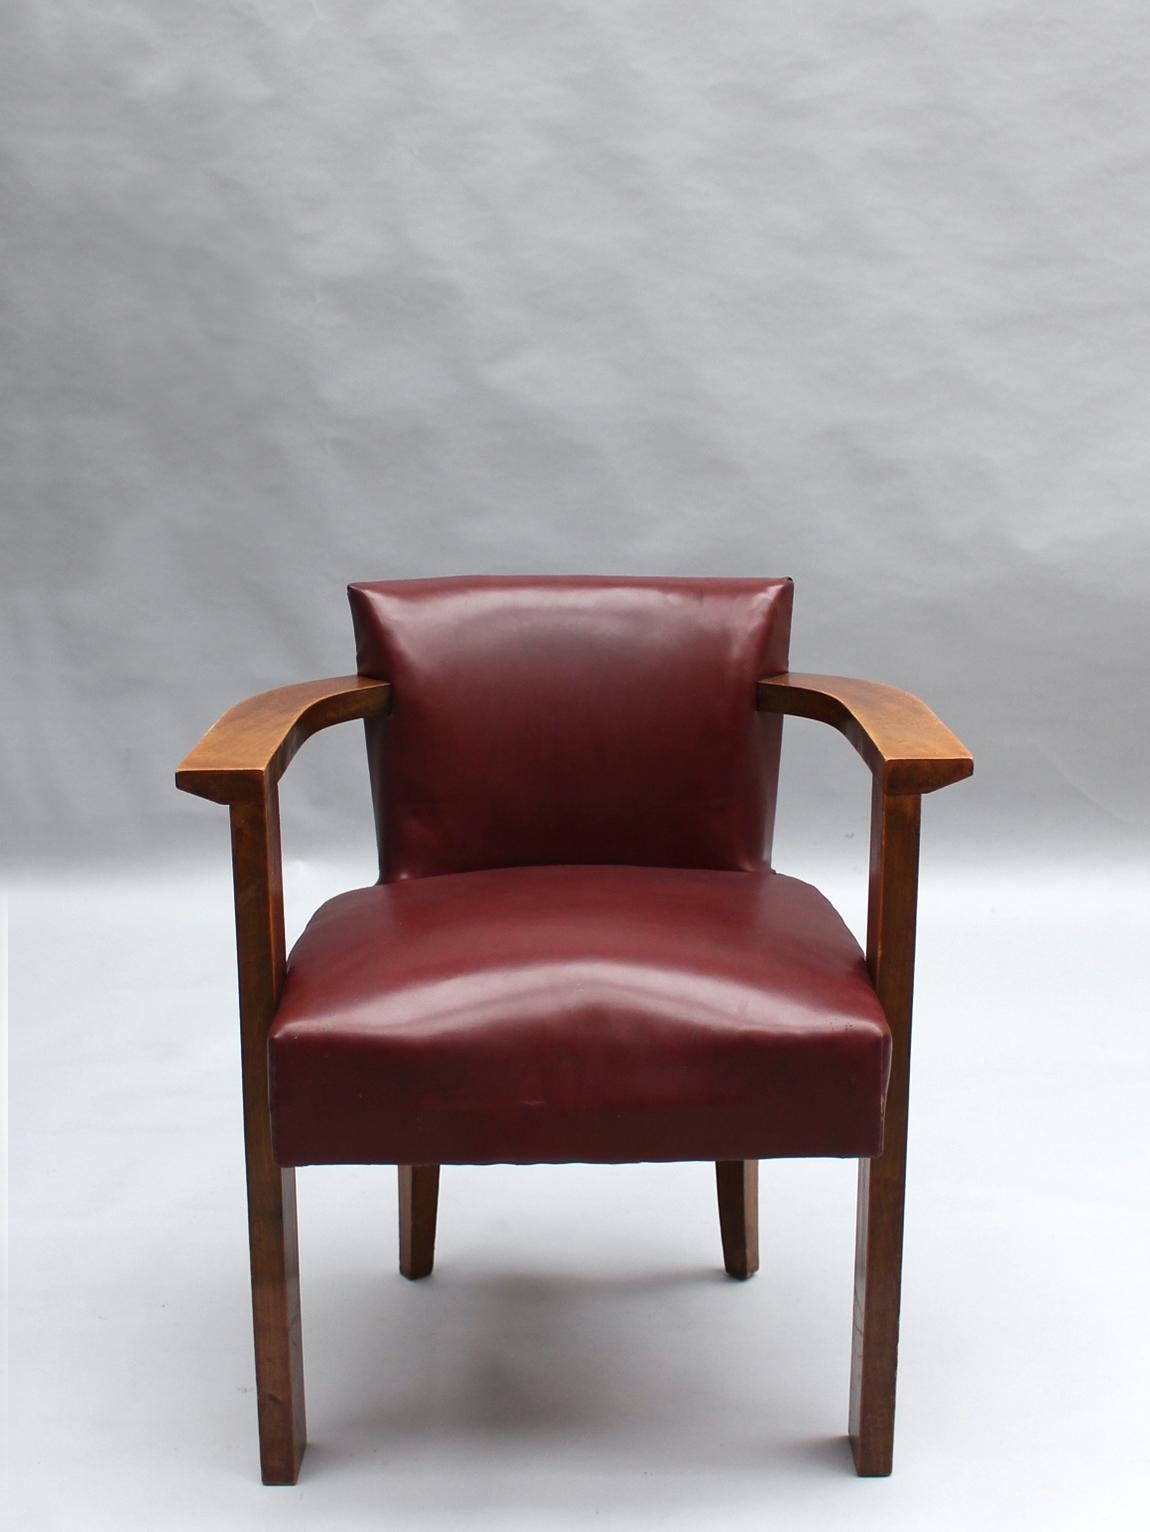 A fine French 1930s desk armchair in solid stained beech wood with flat arms.